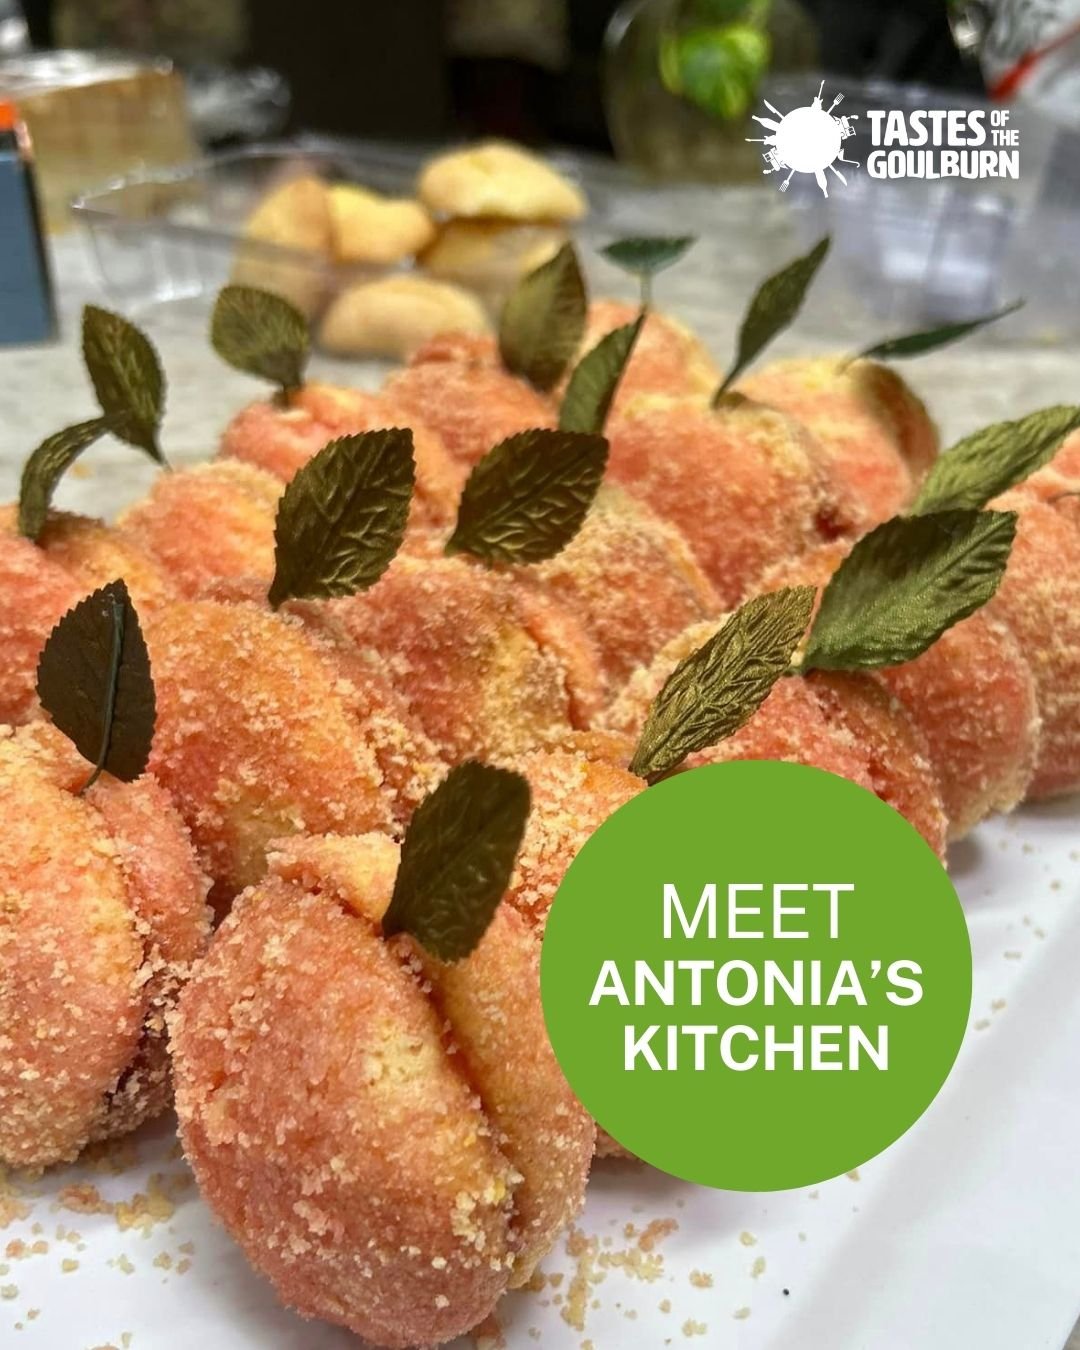 🍝🍰 Warm up with the rich flavors of Antonia's Kitchen at Tastes of the Goulburn on Saturday, 27 April! 

From hearty lasagna to vegetarian options and a sweet variety of Italian biscuits and desserts, including gluten-free choices, there's somethin